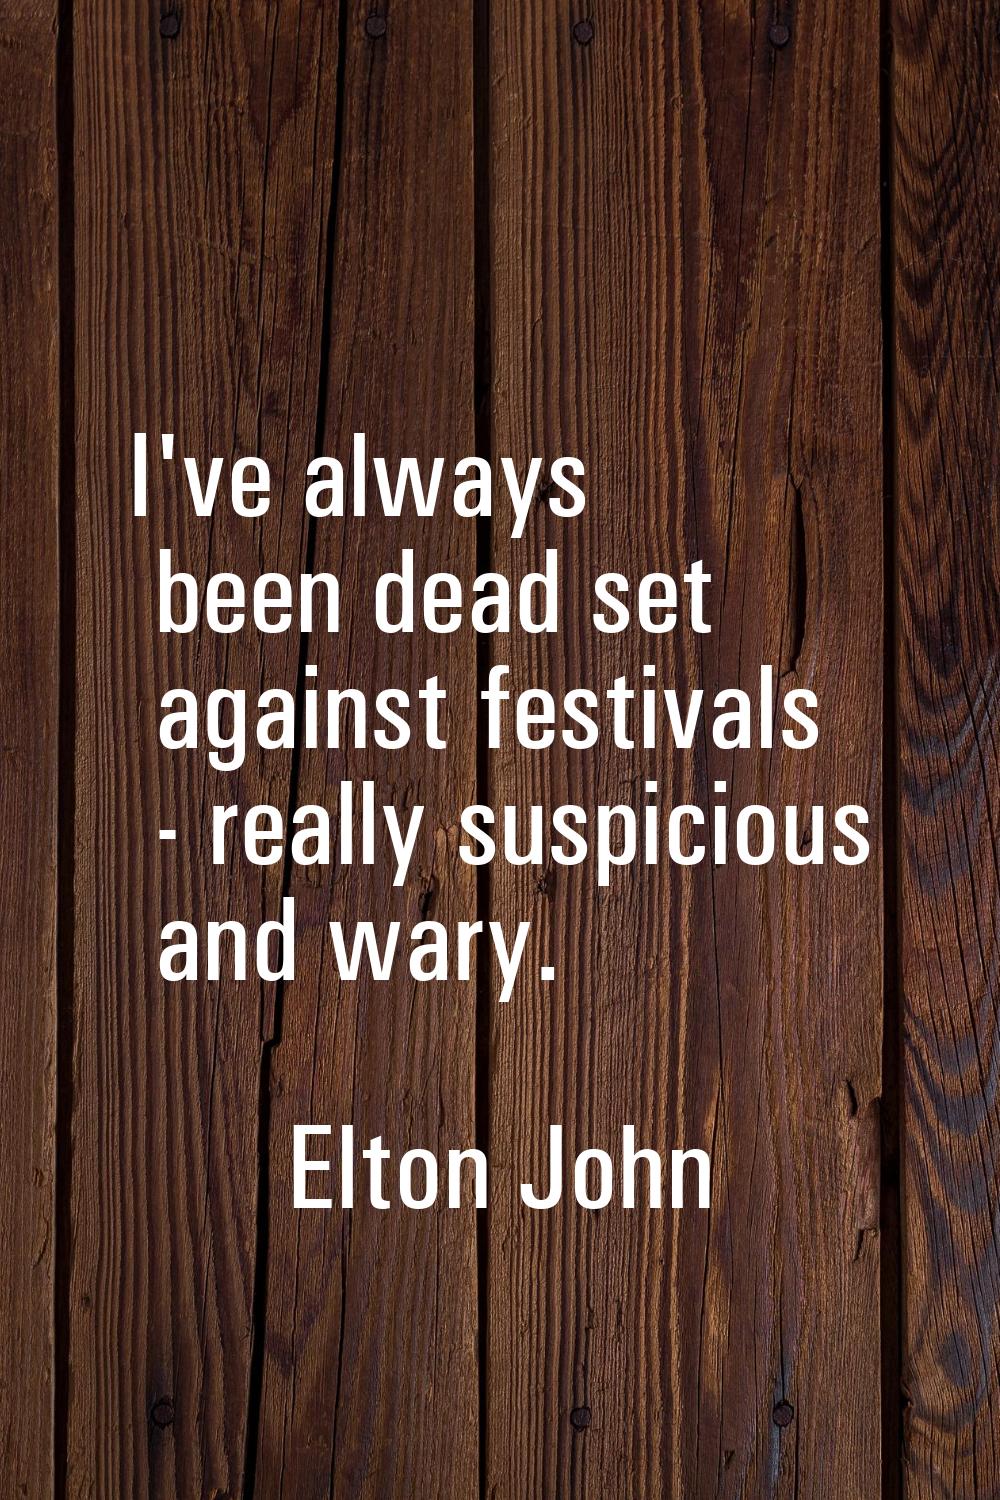 I've always been dead set against festivals - really suspicious and wary.